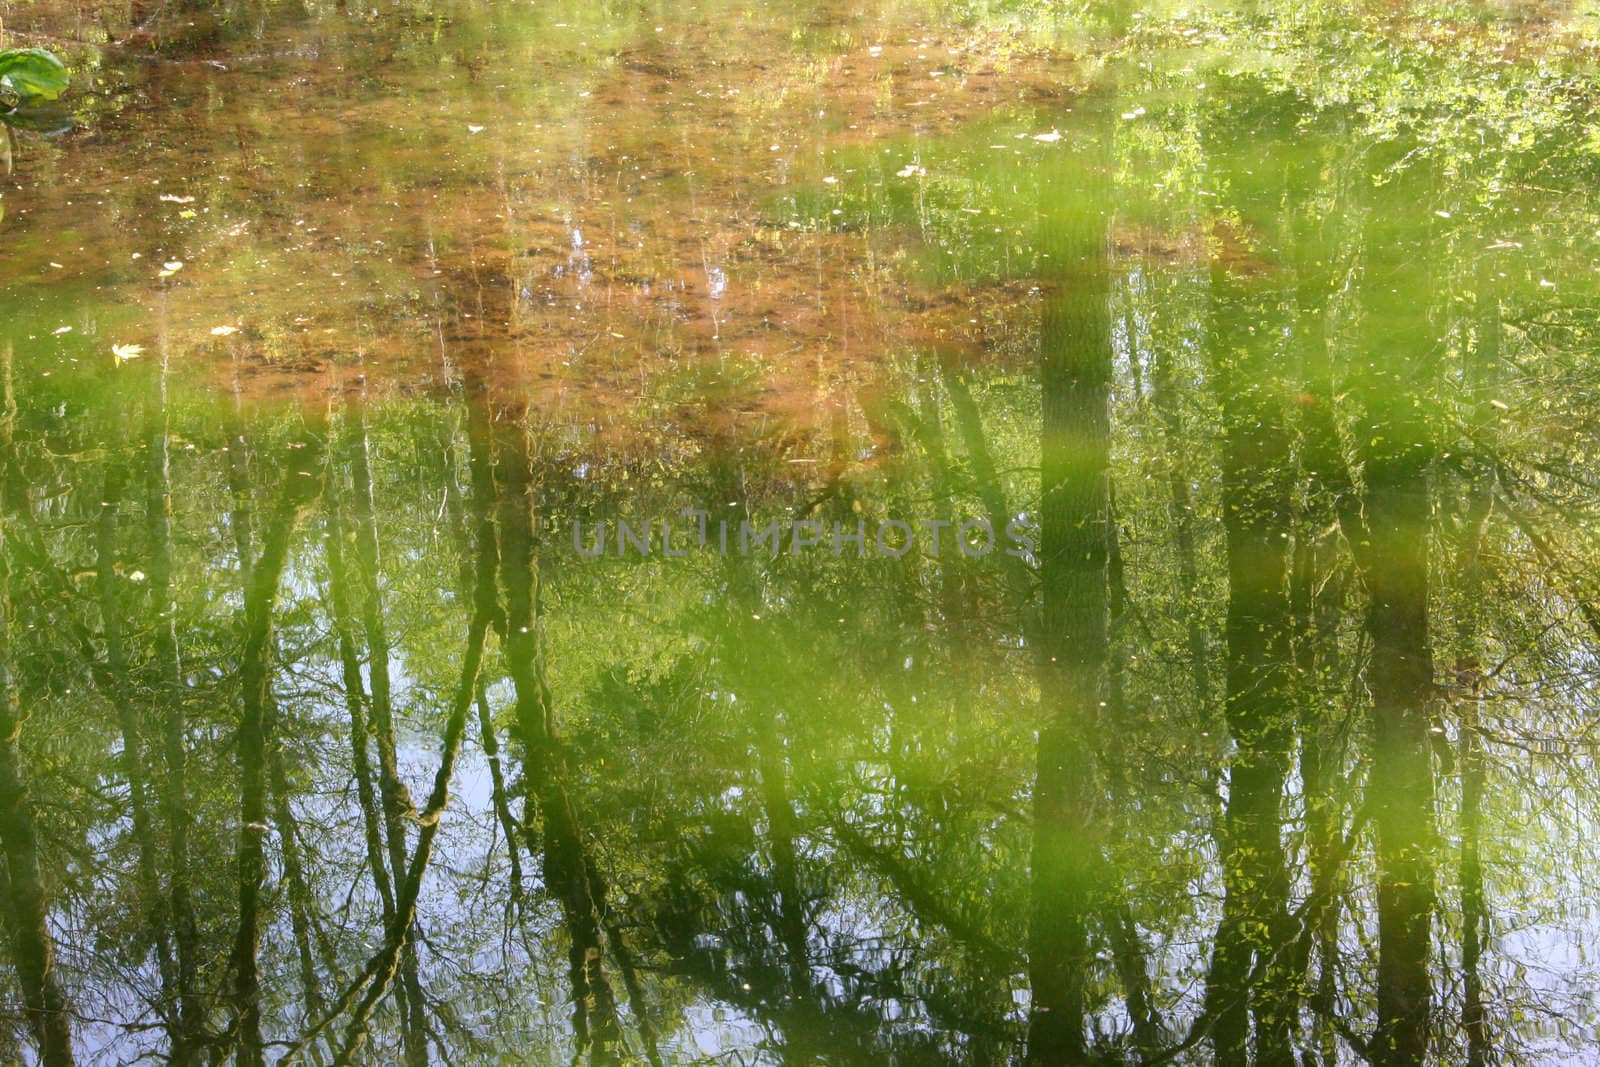 Reflections of a forest on a shallow algae filled pond 
